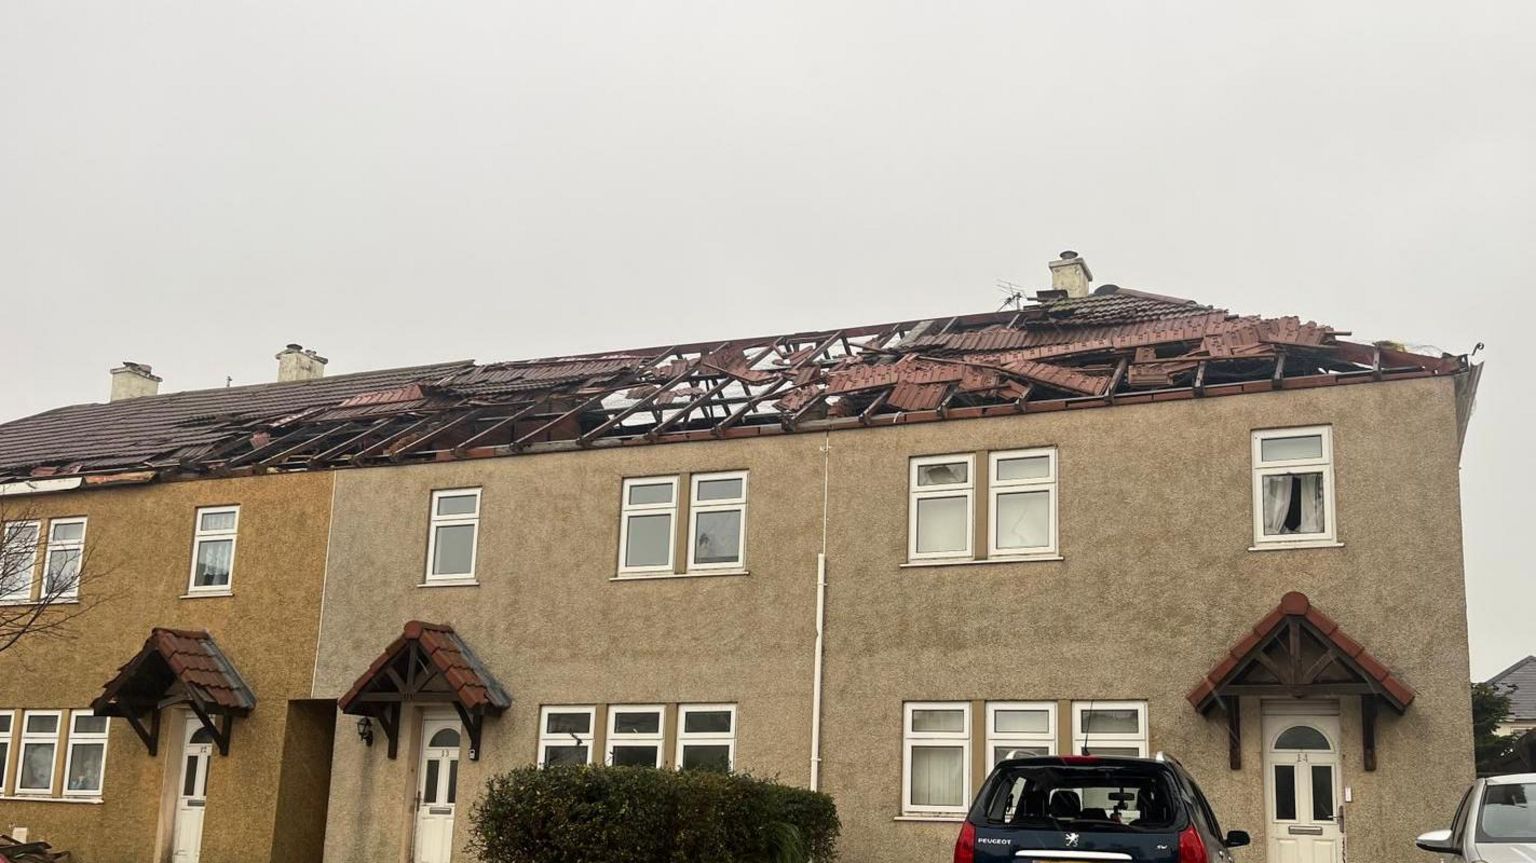 Roof fallen of due to storm in Jersey